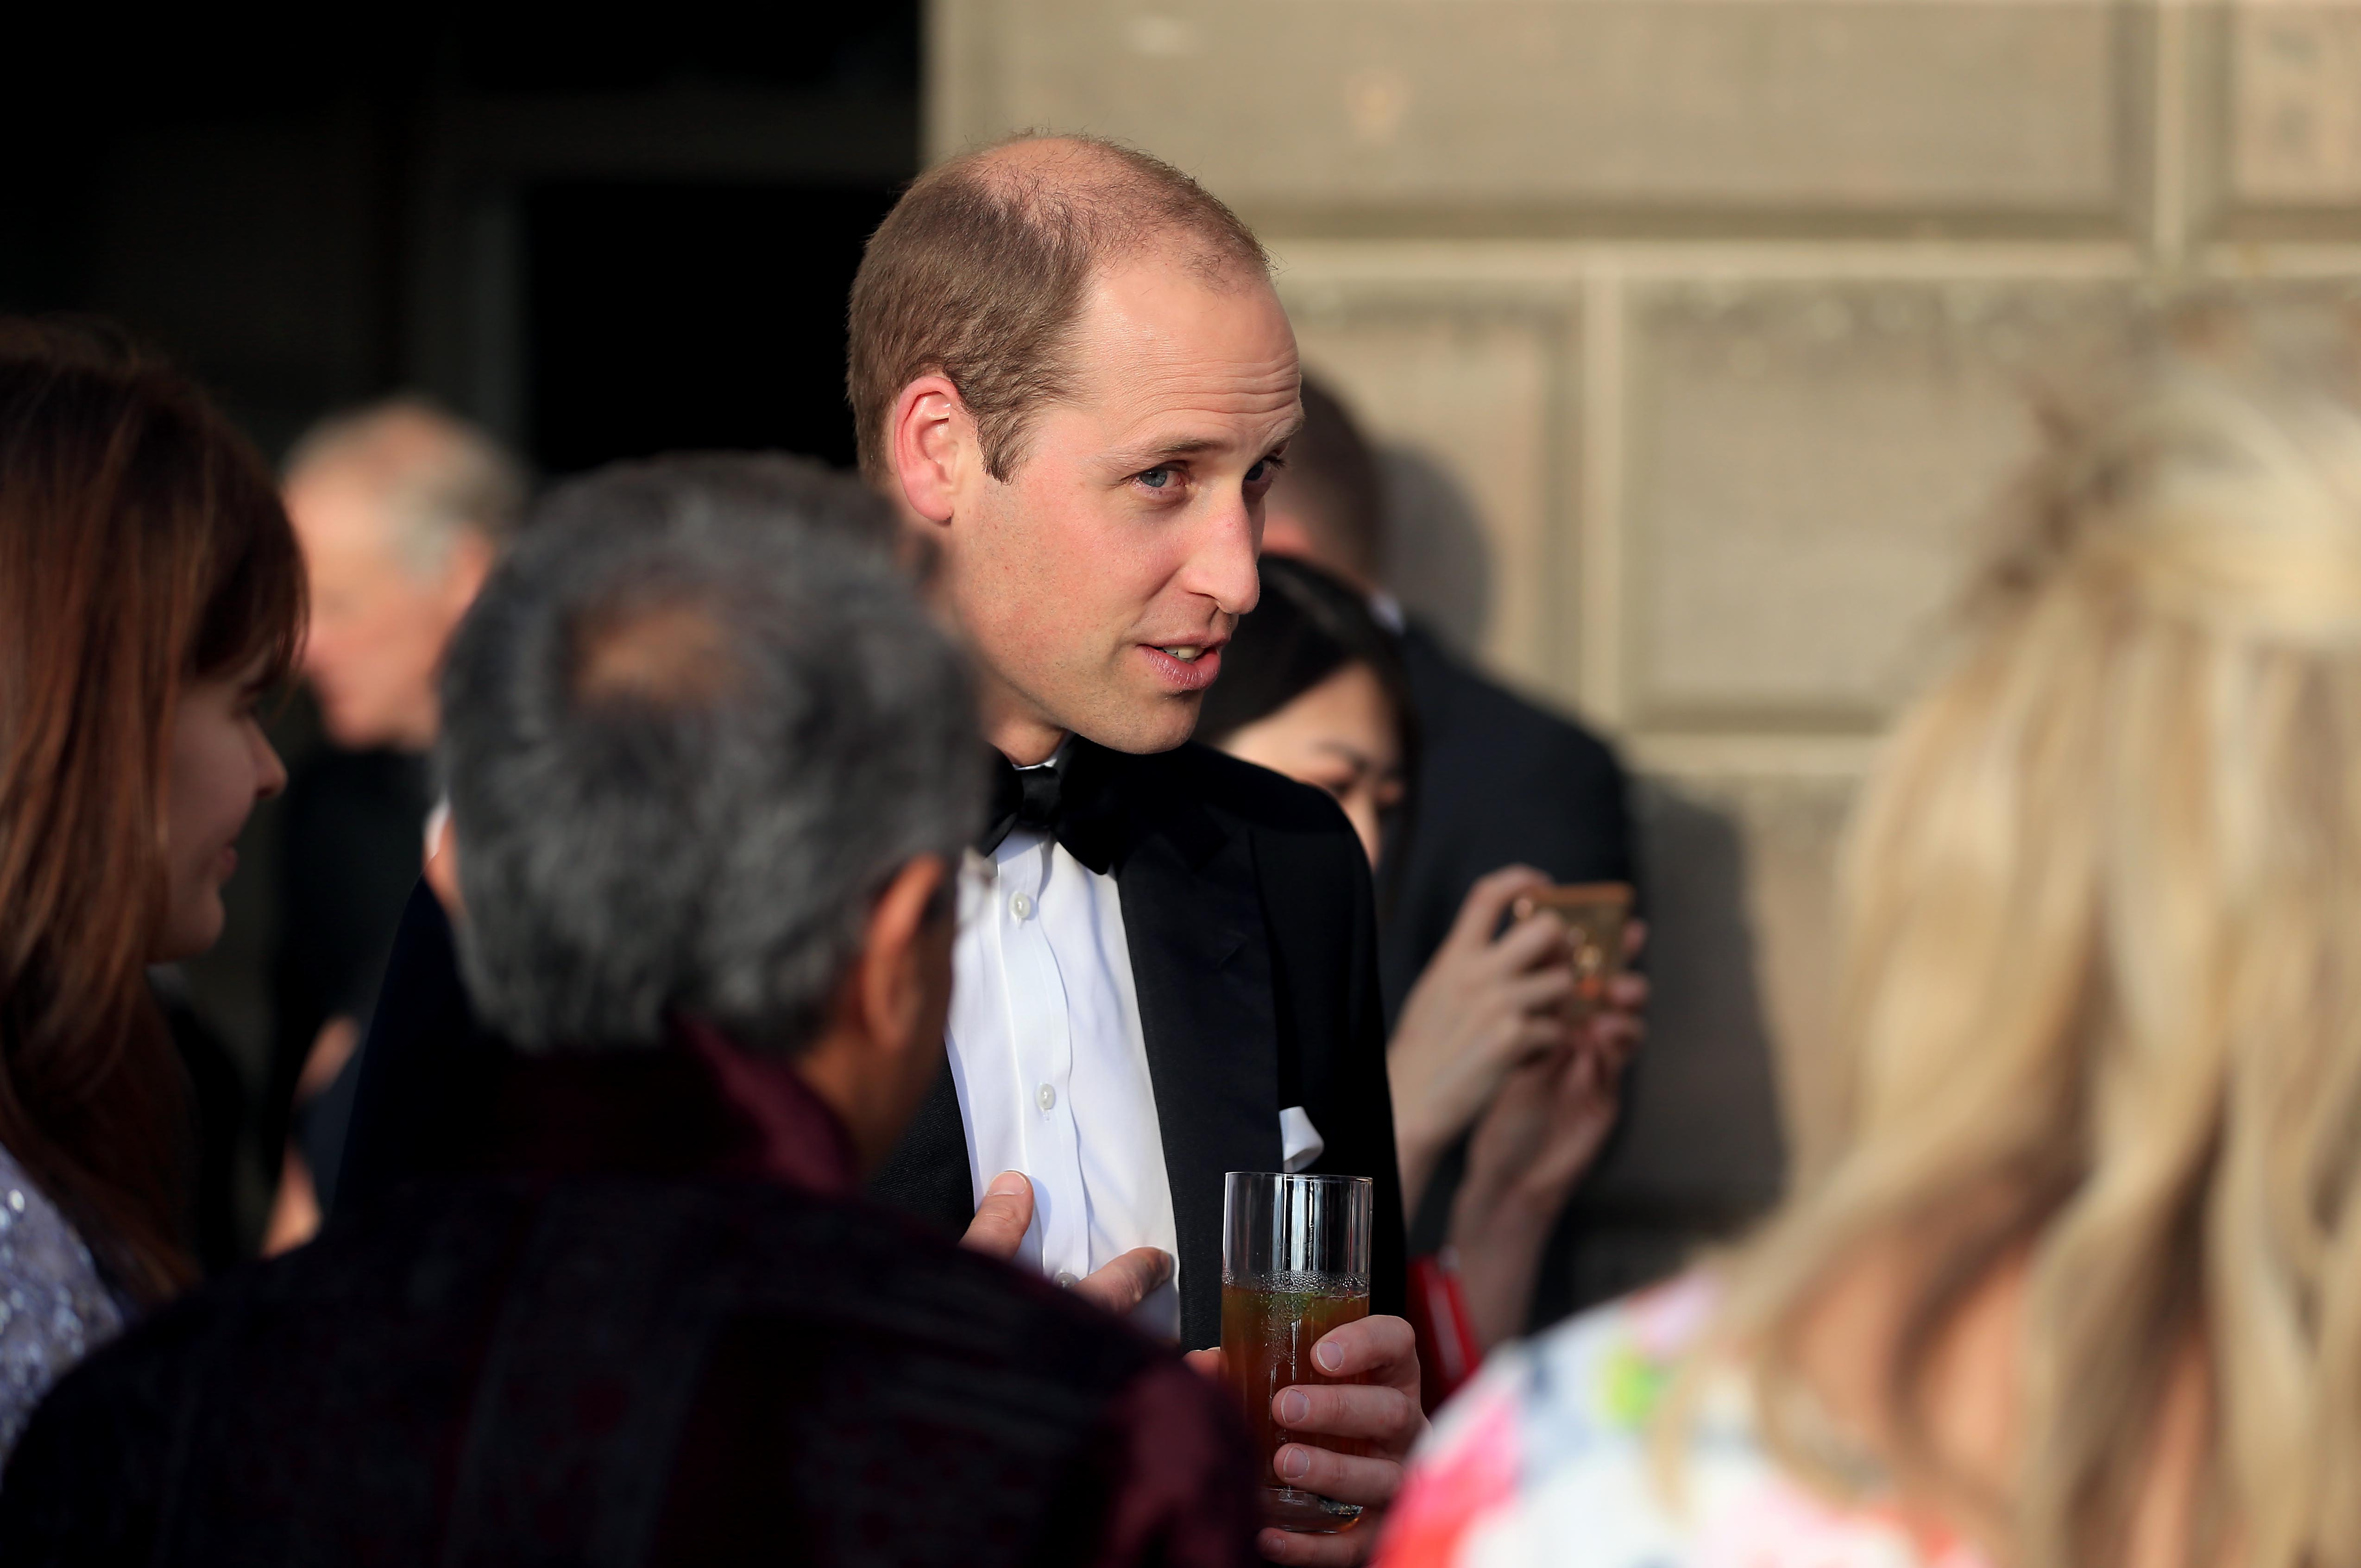 Prince William attends a gala dinner in support of East Anglia's Children's Hospices' nook appeal at Houghton Hall on June 22, 2016 in King's Lynn, England | Source: Getty Images